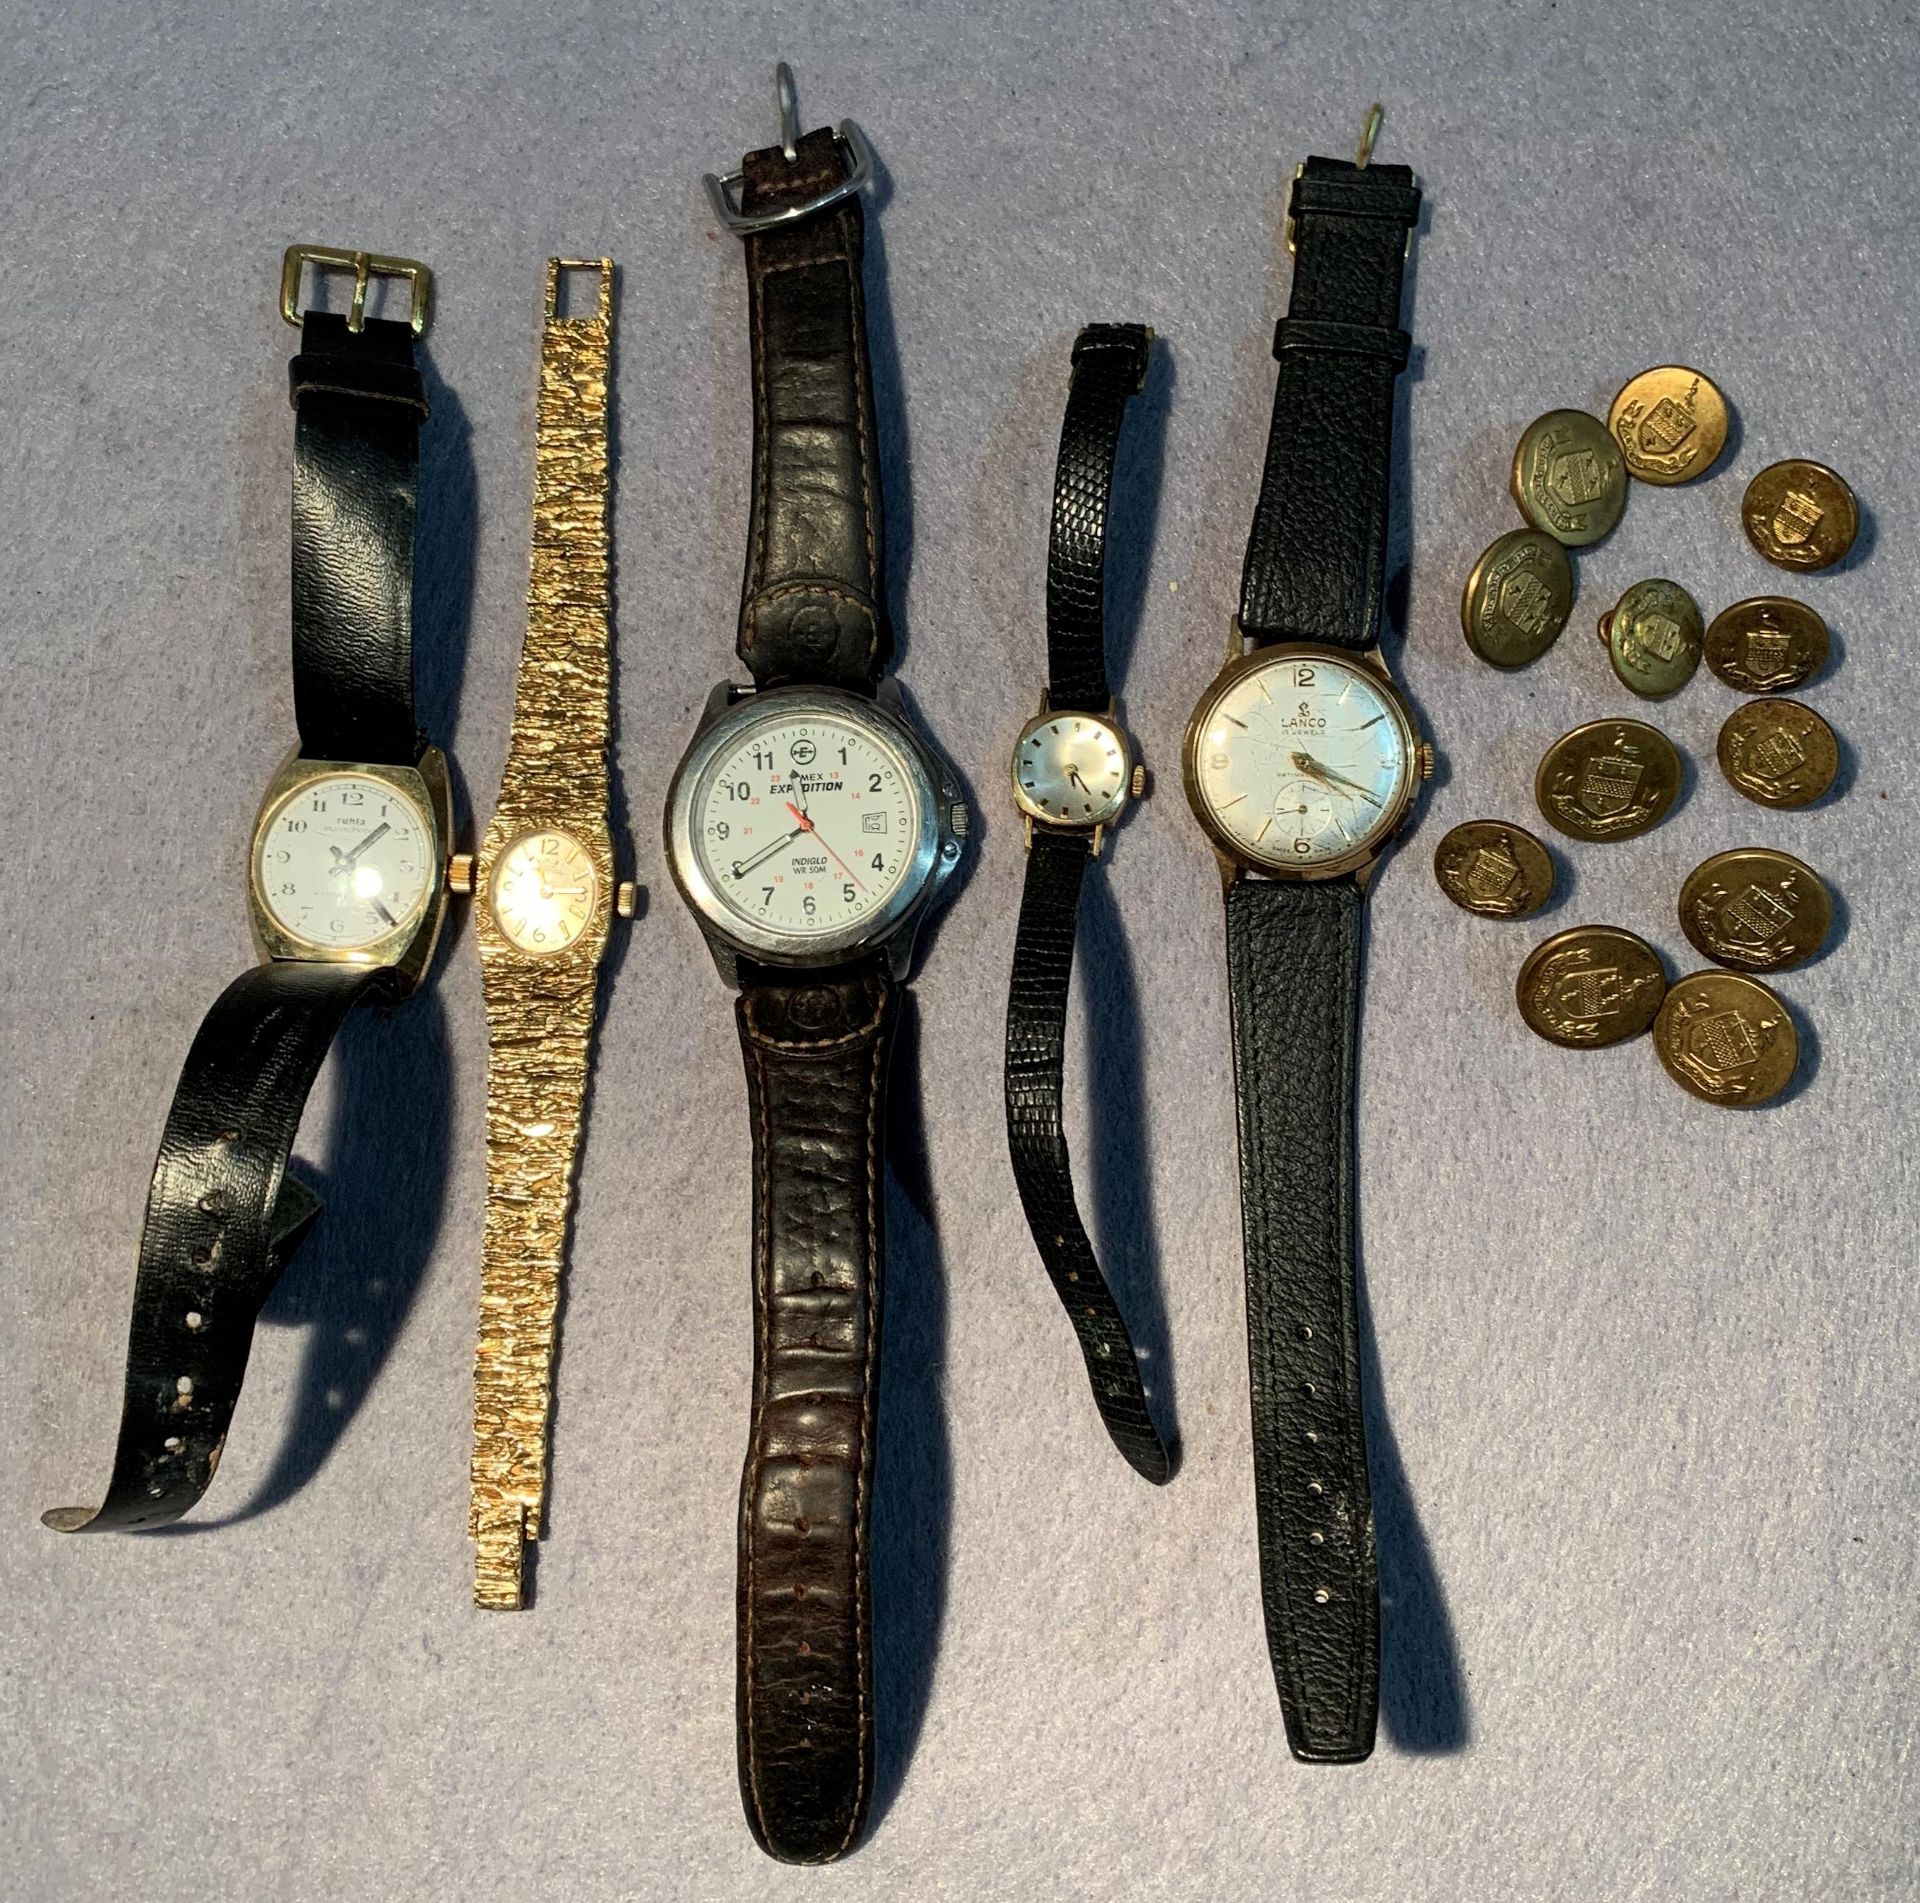 Contents to tub - five various wrist watches and a small quantity of military brass buttons